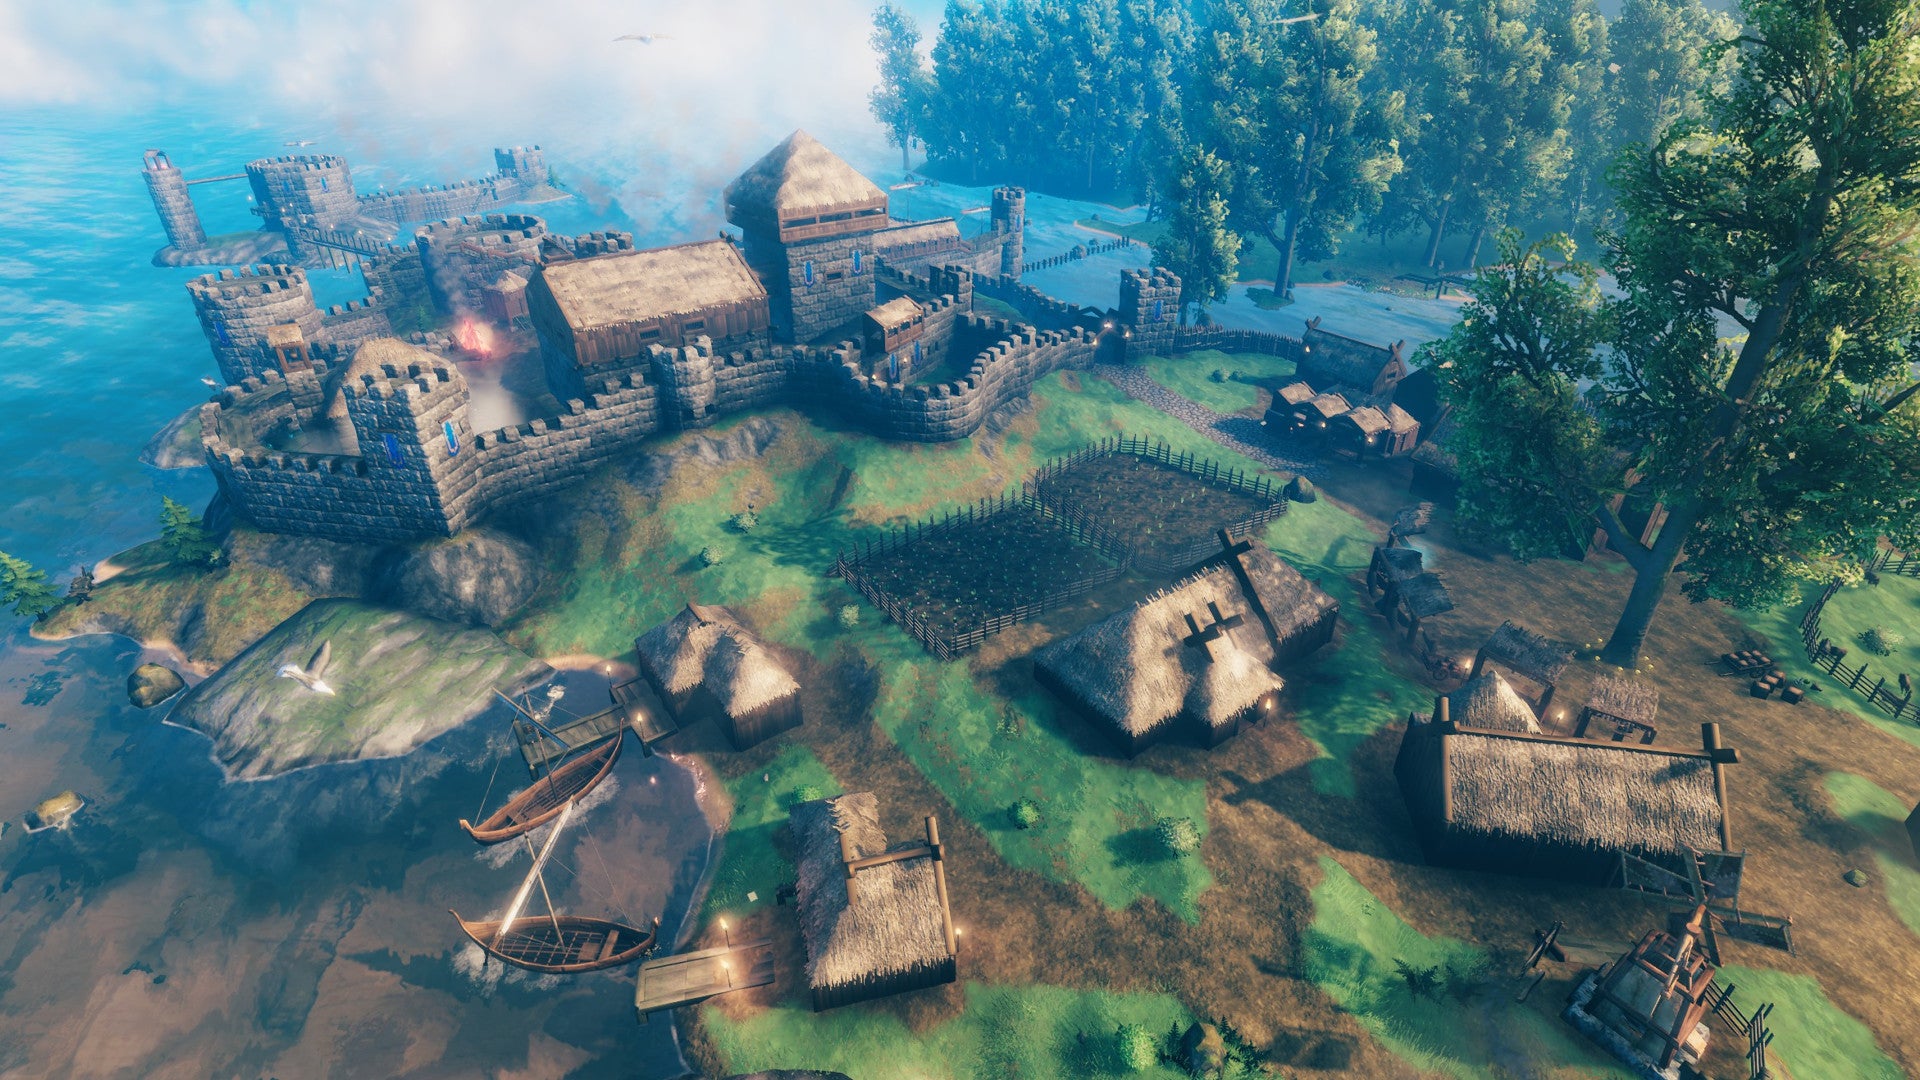 A Valheim screenshot of an extensive settlement with multiple houses, walls, and farms, seen from an aerial perspective.